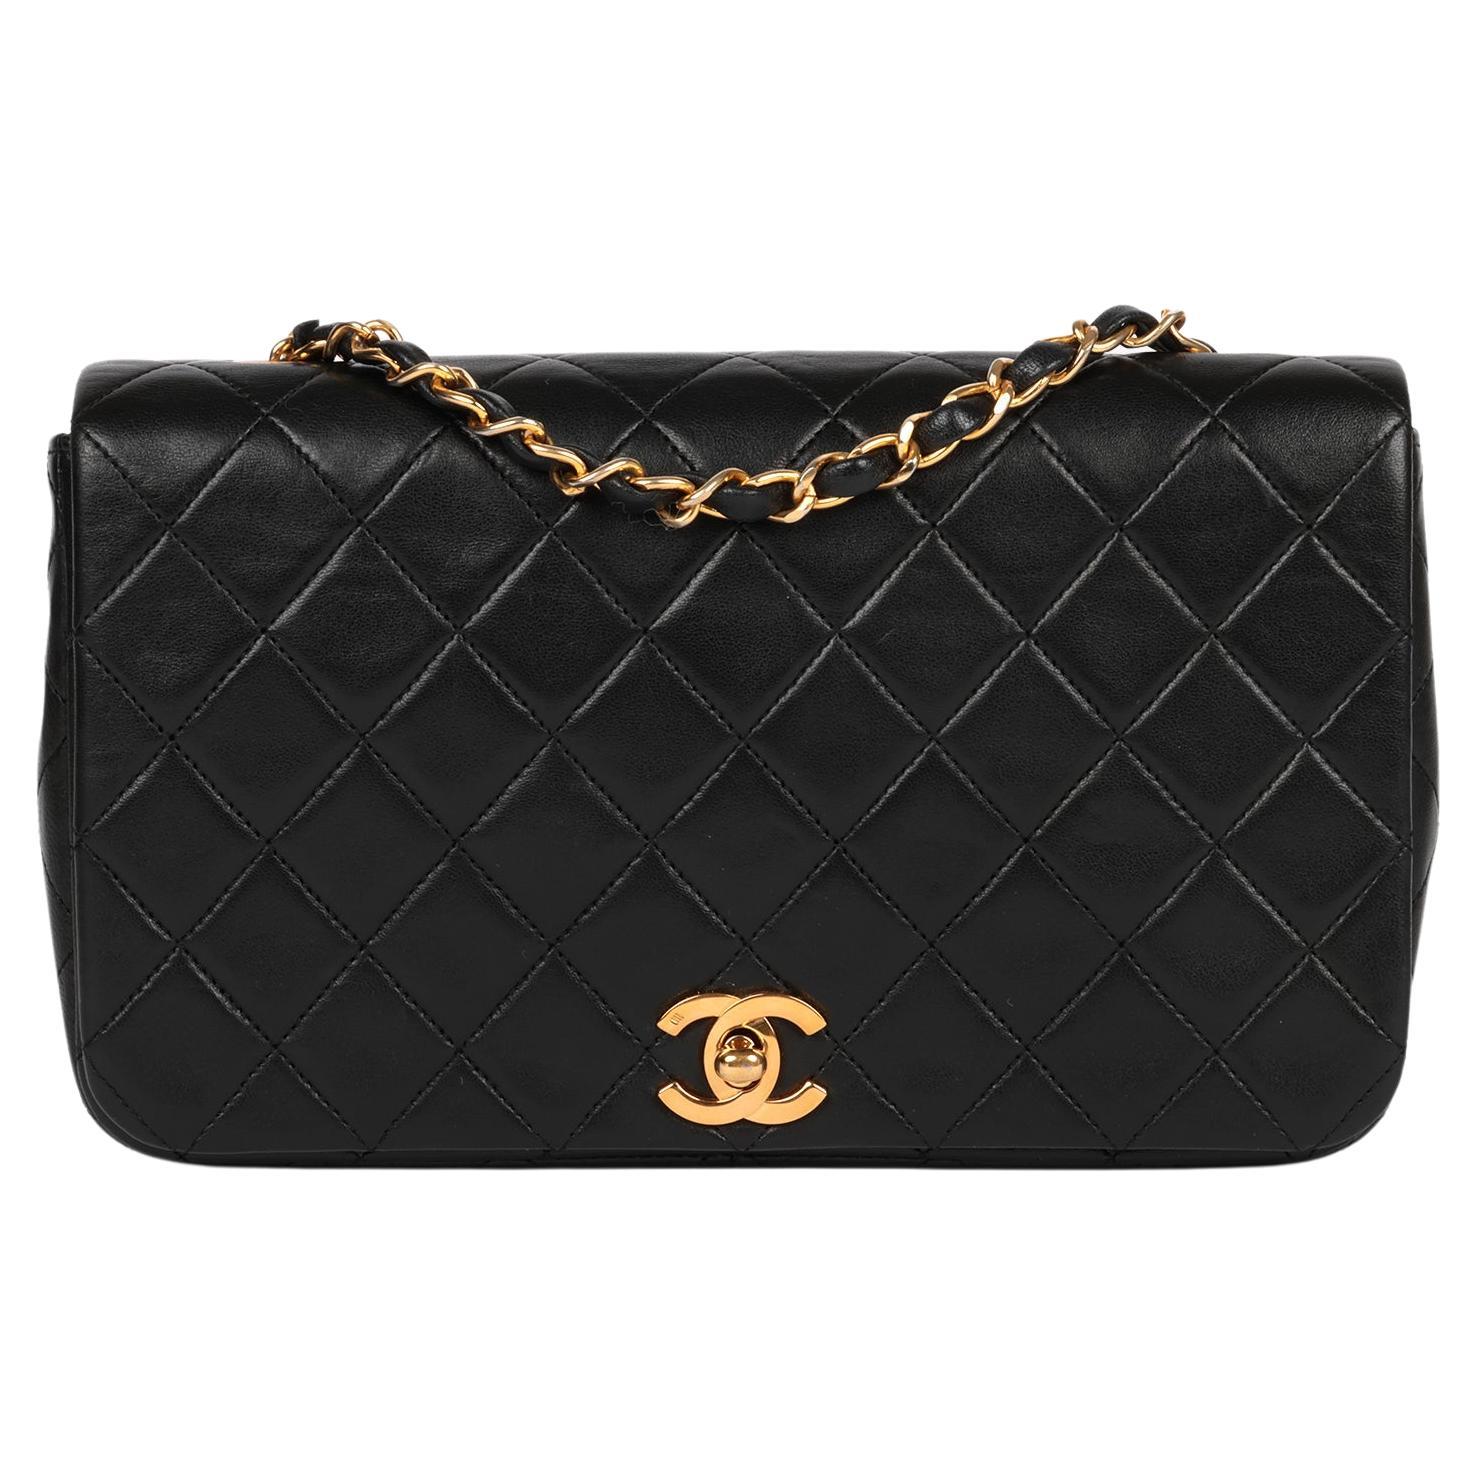 Does Chanel have a crossbody bag?